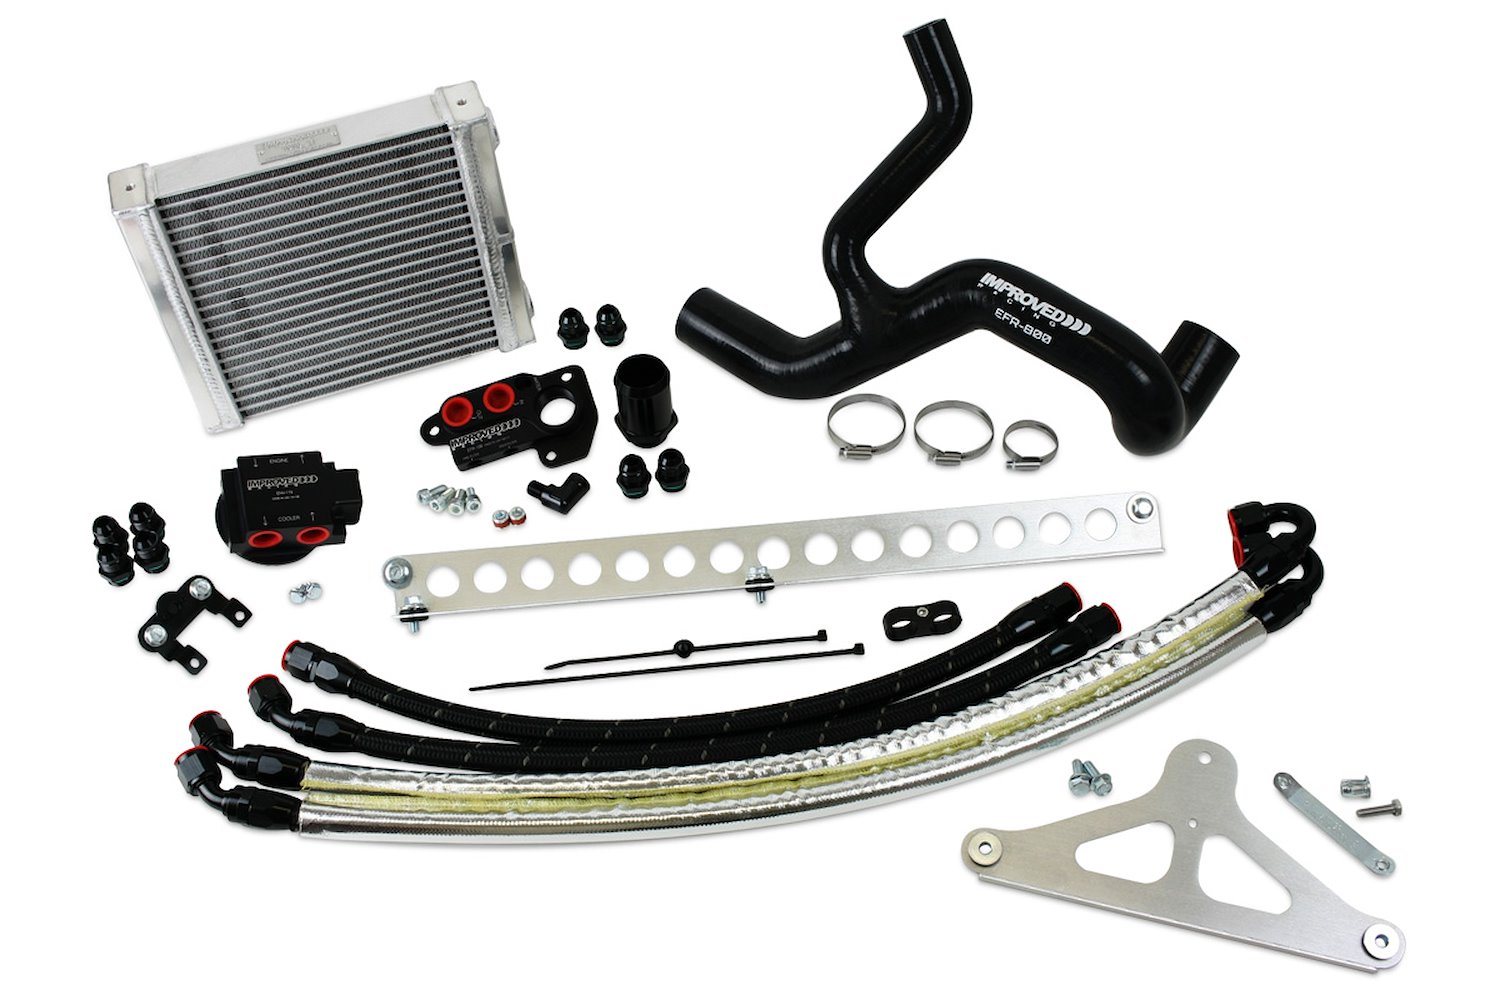 EFR-600-T6 Oil Cooler & Filter Relocation Kit, 1996-2004 Ford Mustang GT, 200-degrees F